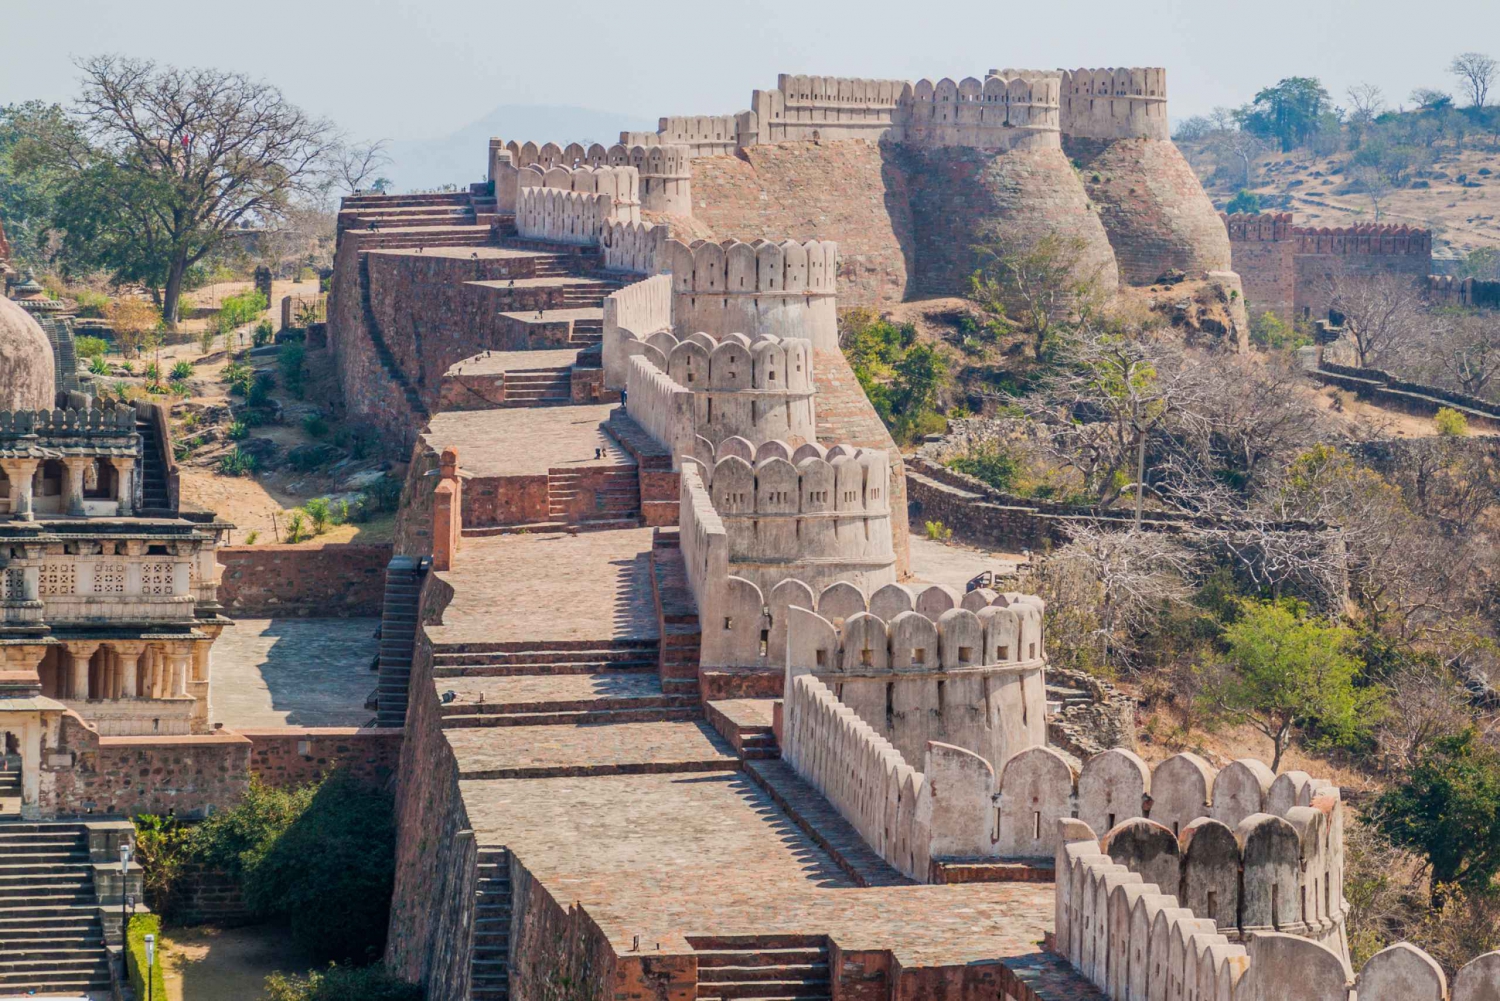 Udaipur: Private Tour of Kumbhalgarh and Ranakpur with Lunch